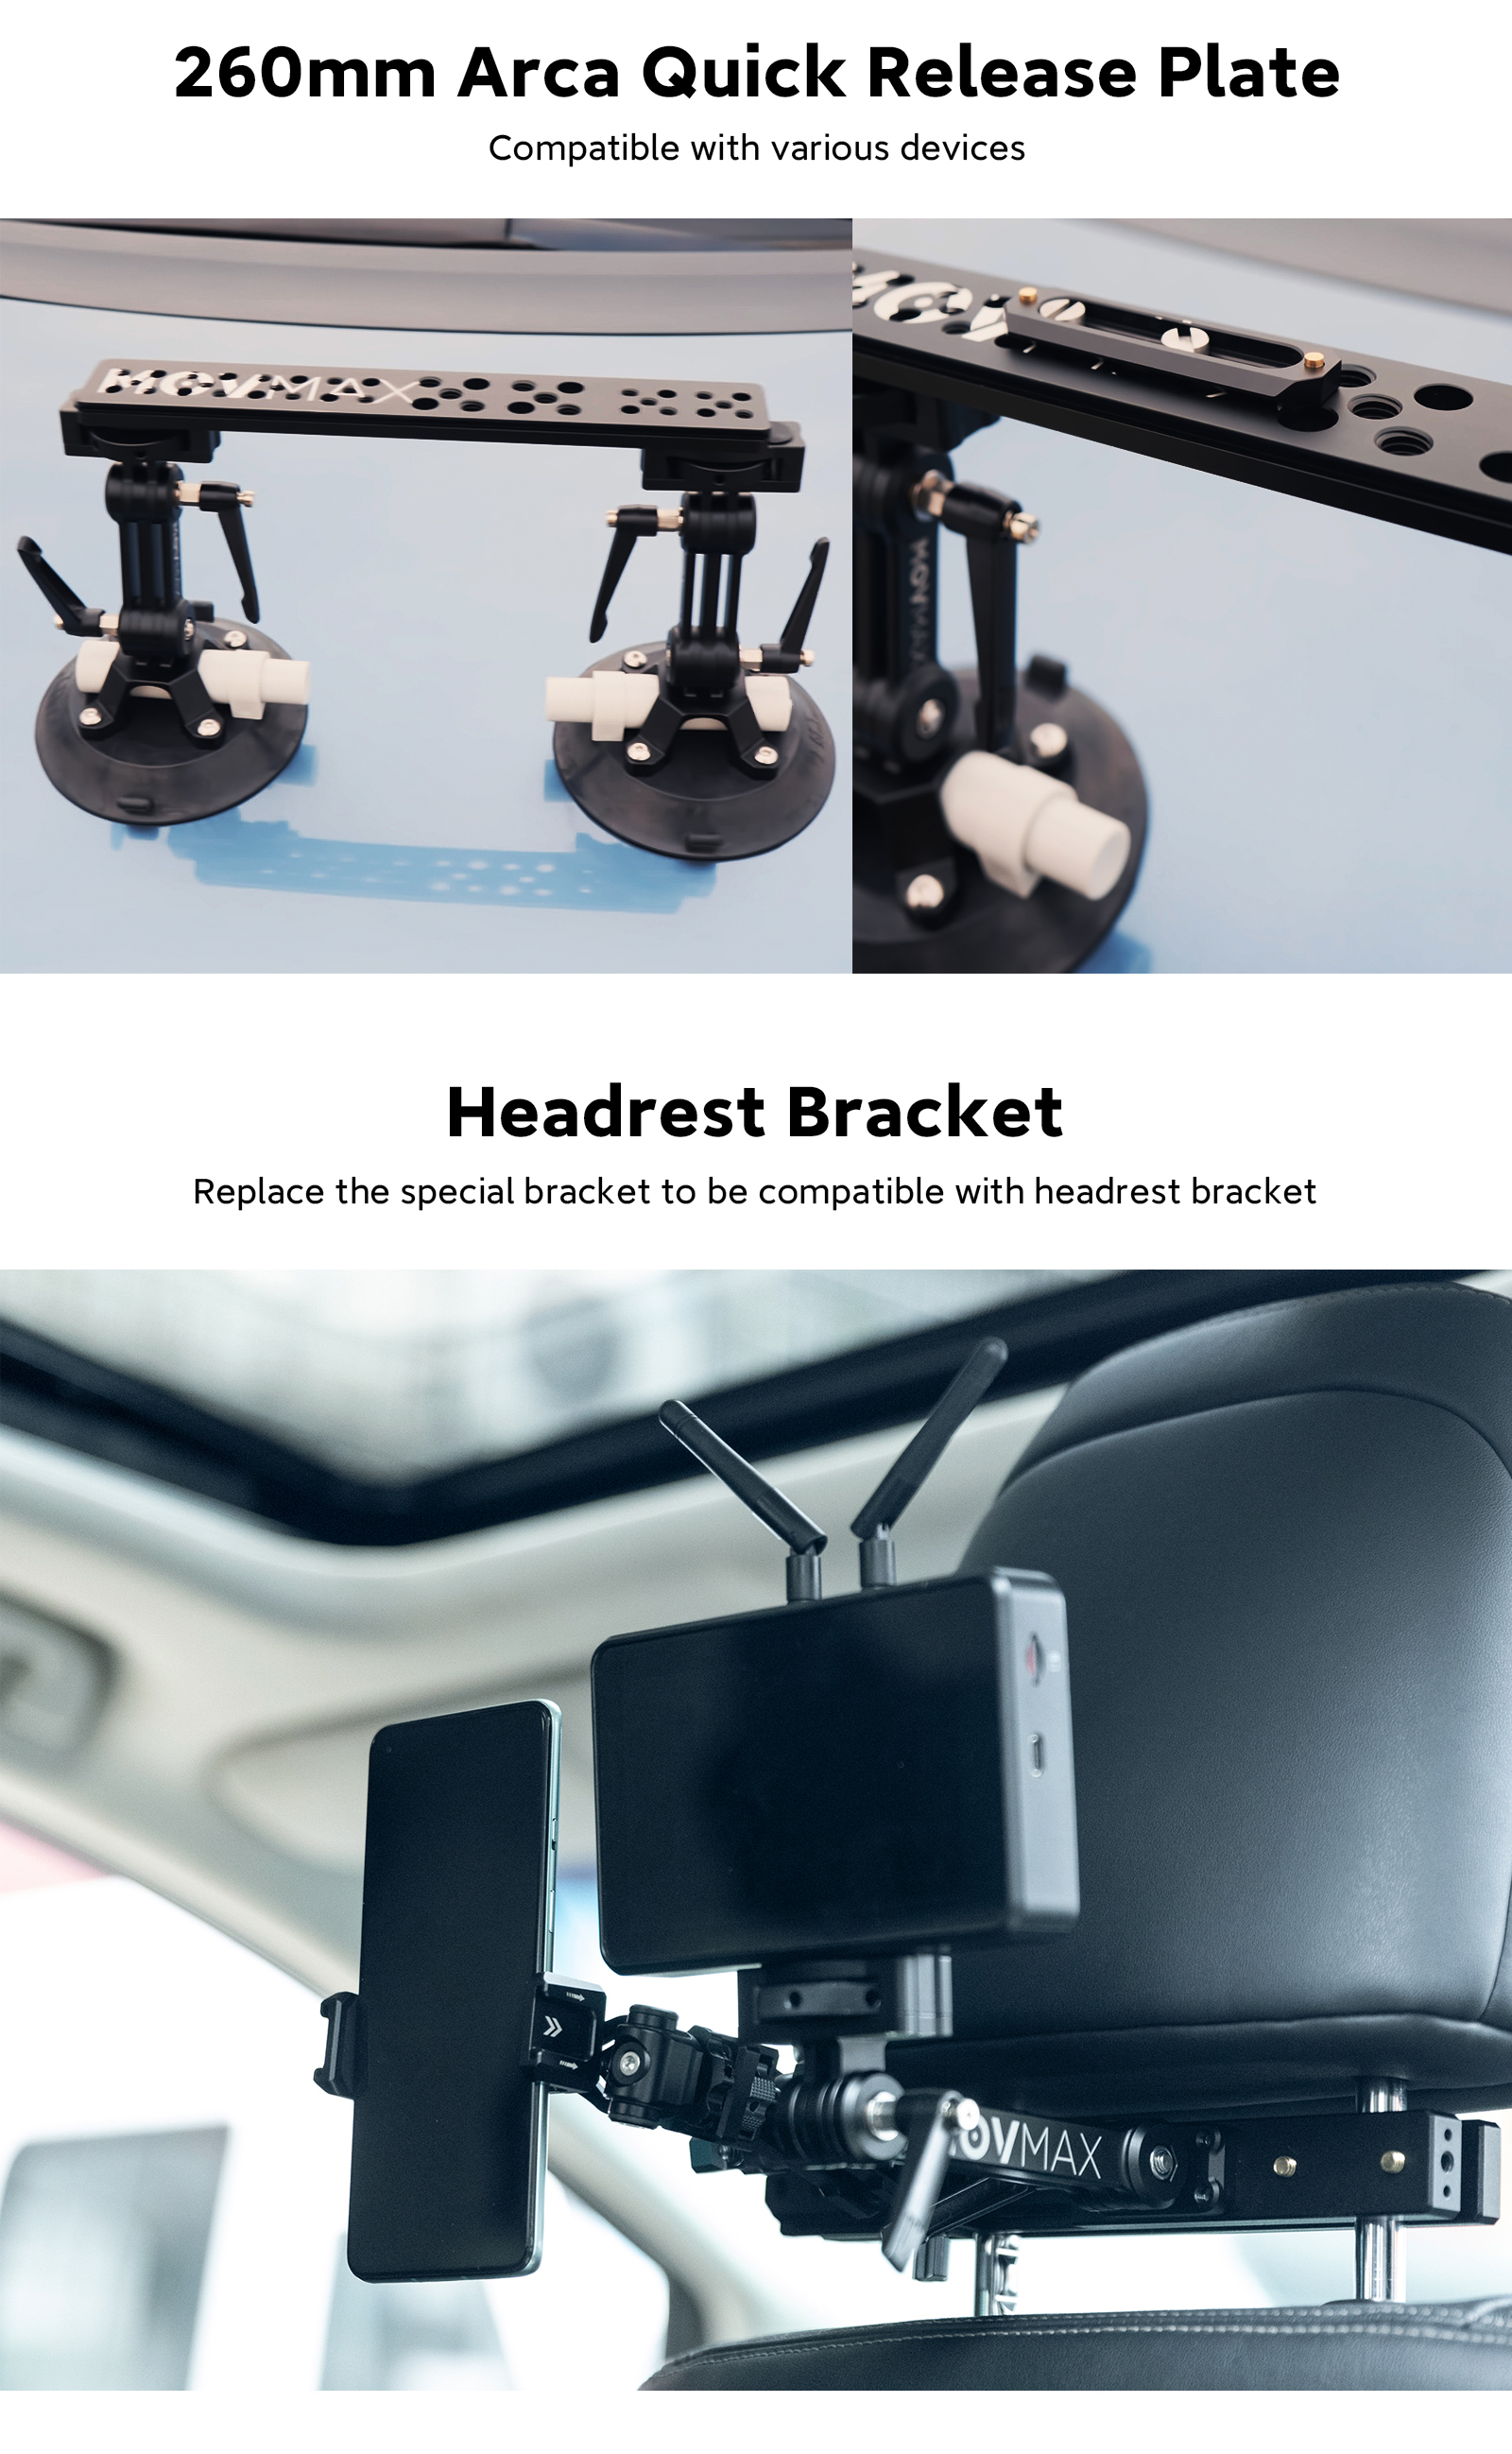 MOVMAX Suction Cup Bracket